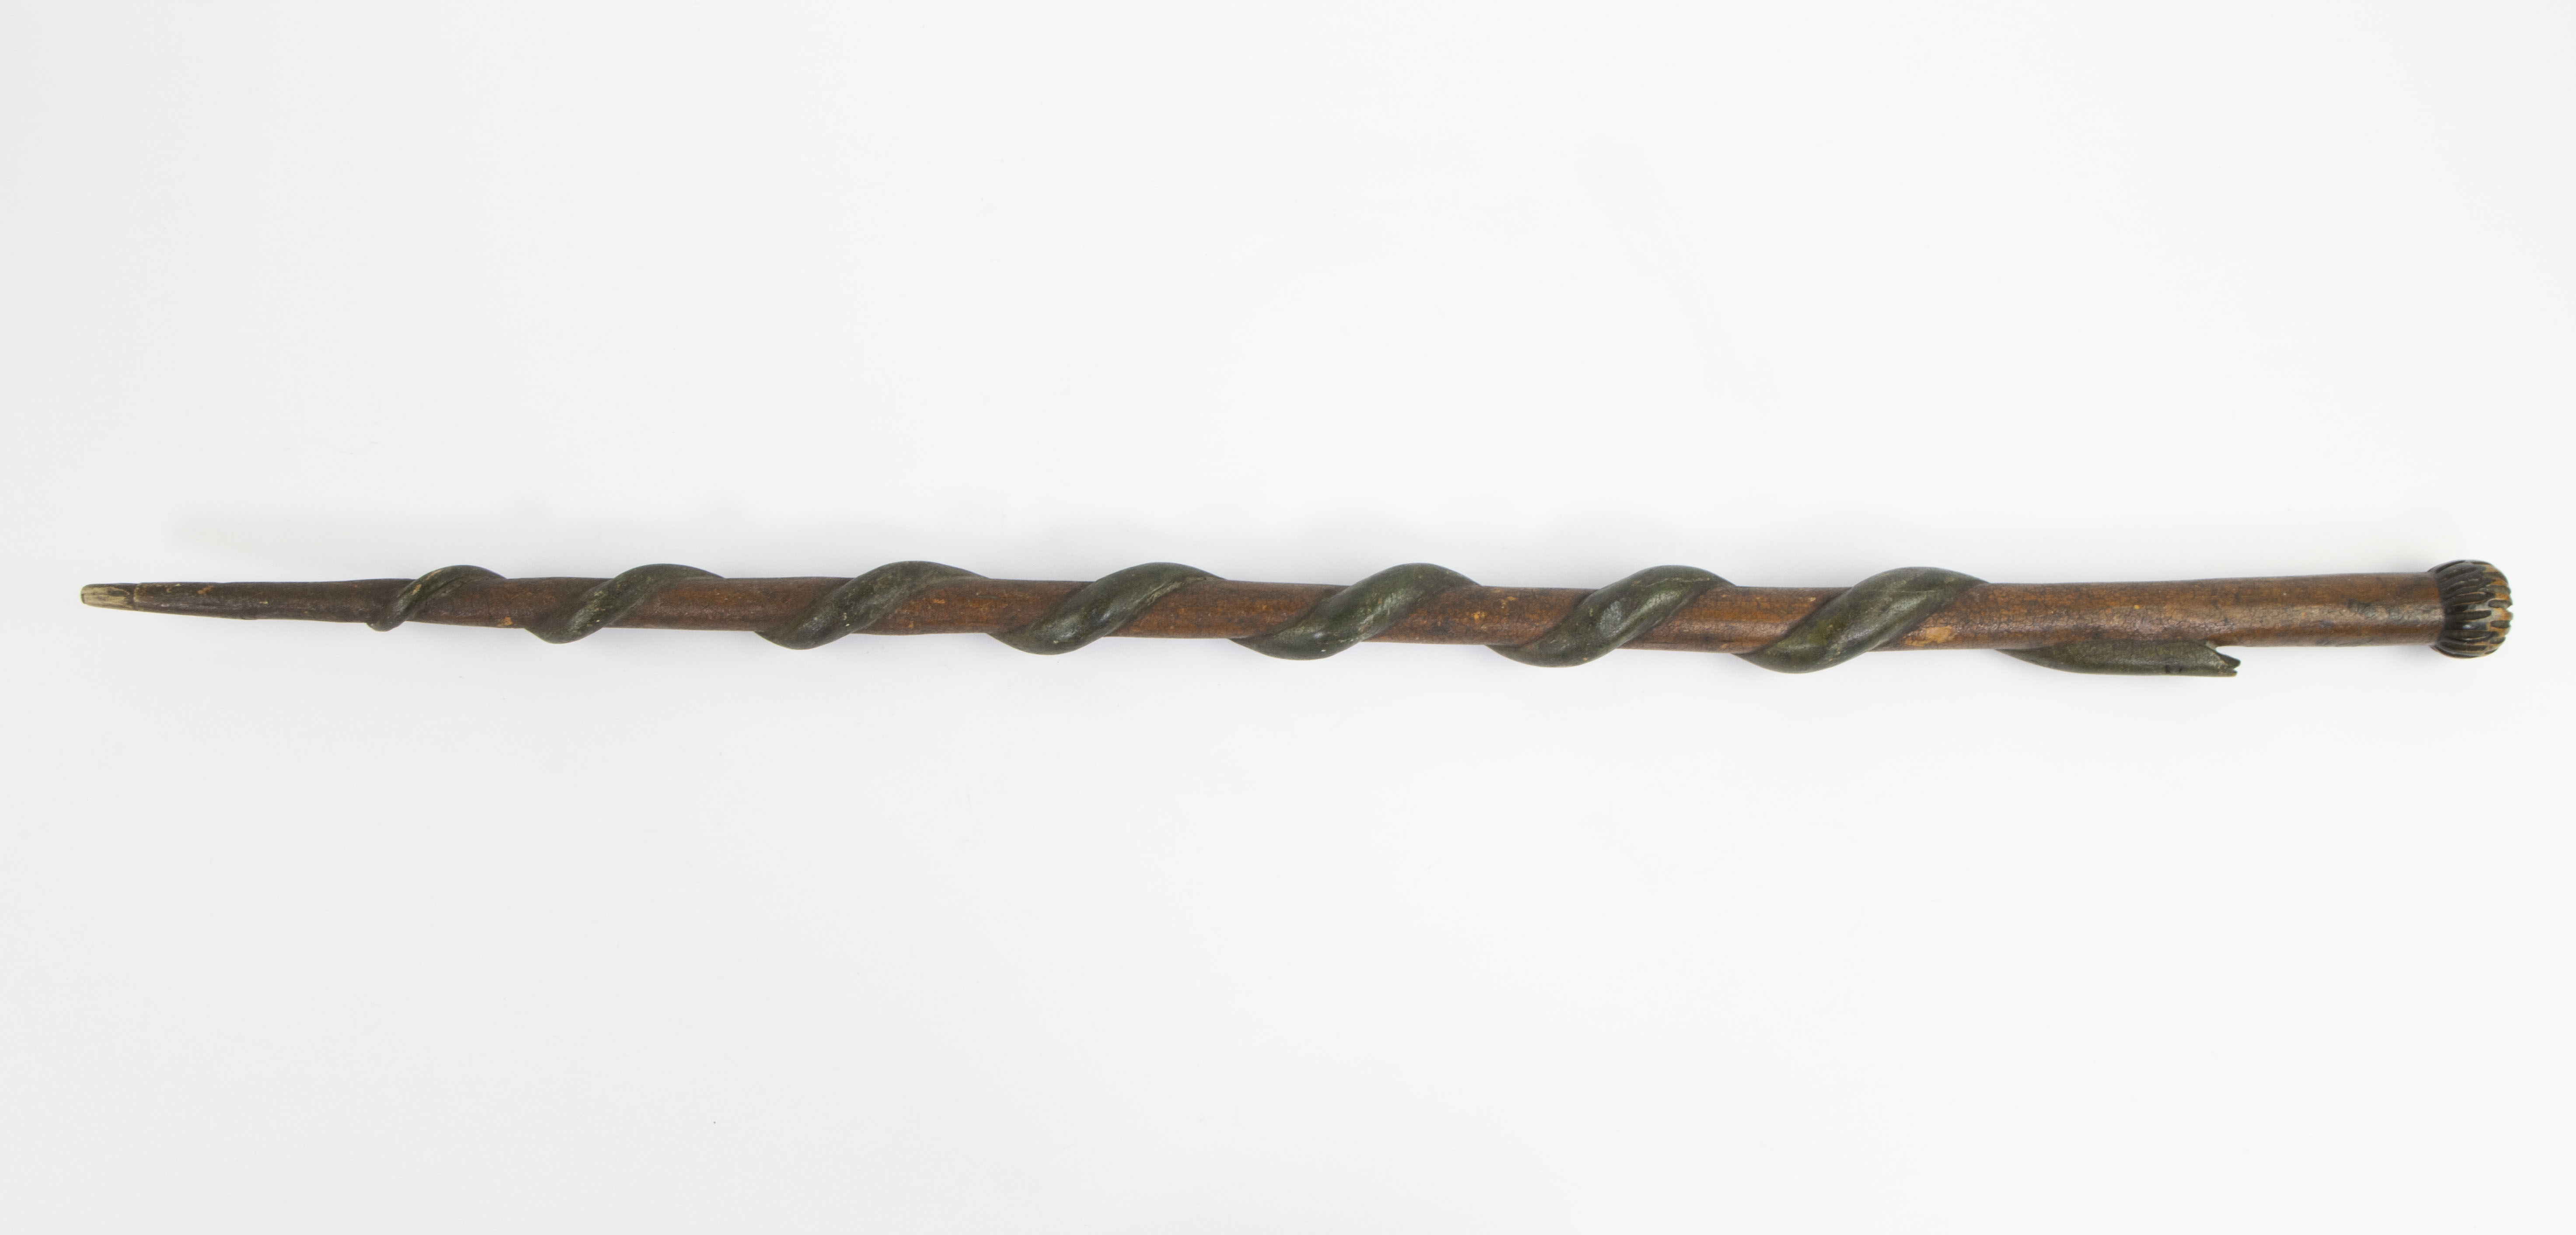 Antique wooden walking stick twisted with a snake - Image 3 of 3